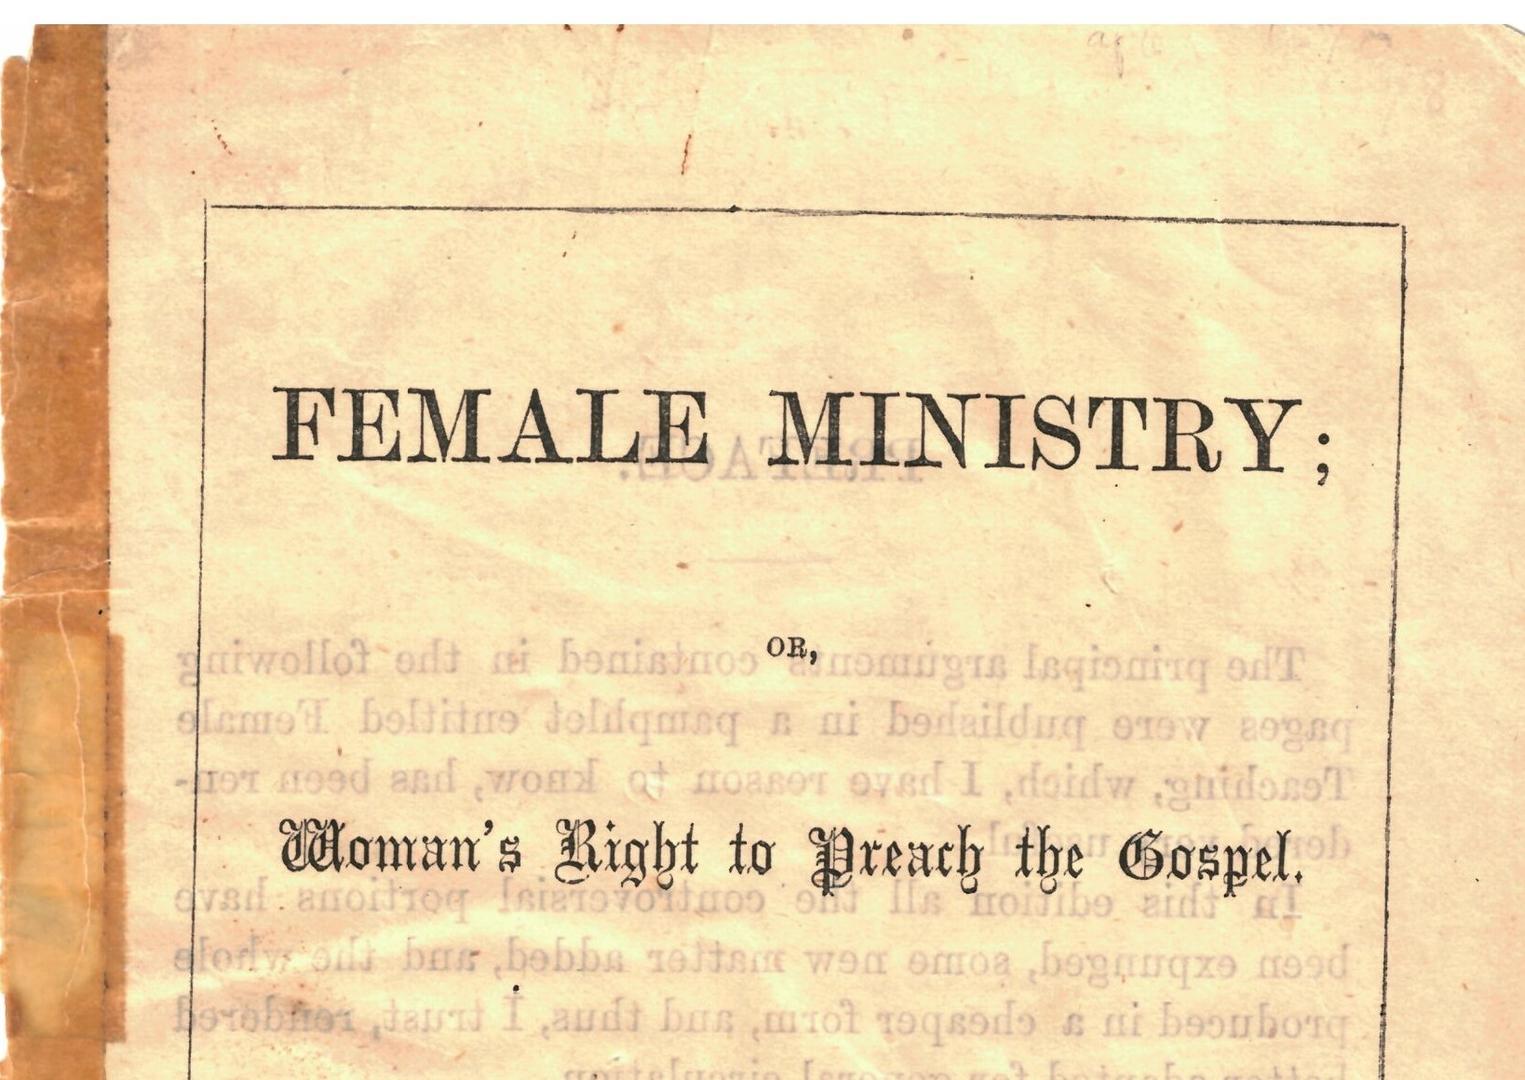 Female Ministry by Catherine Booth